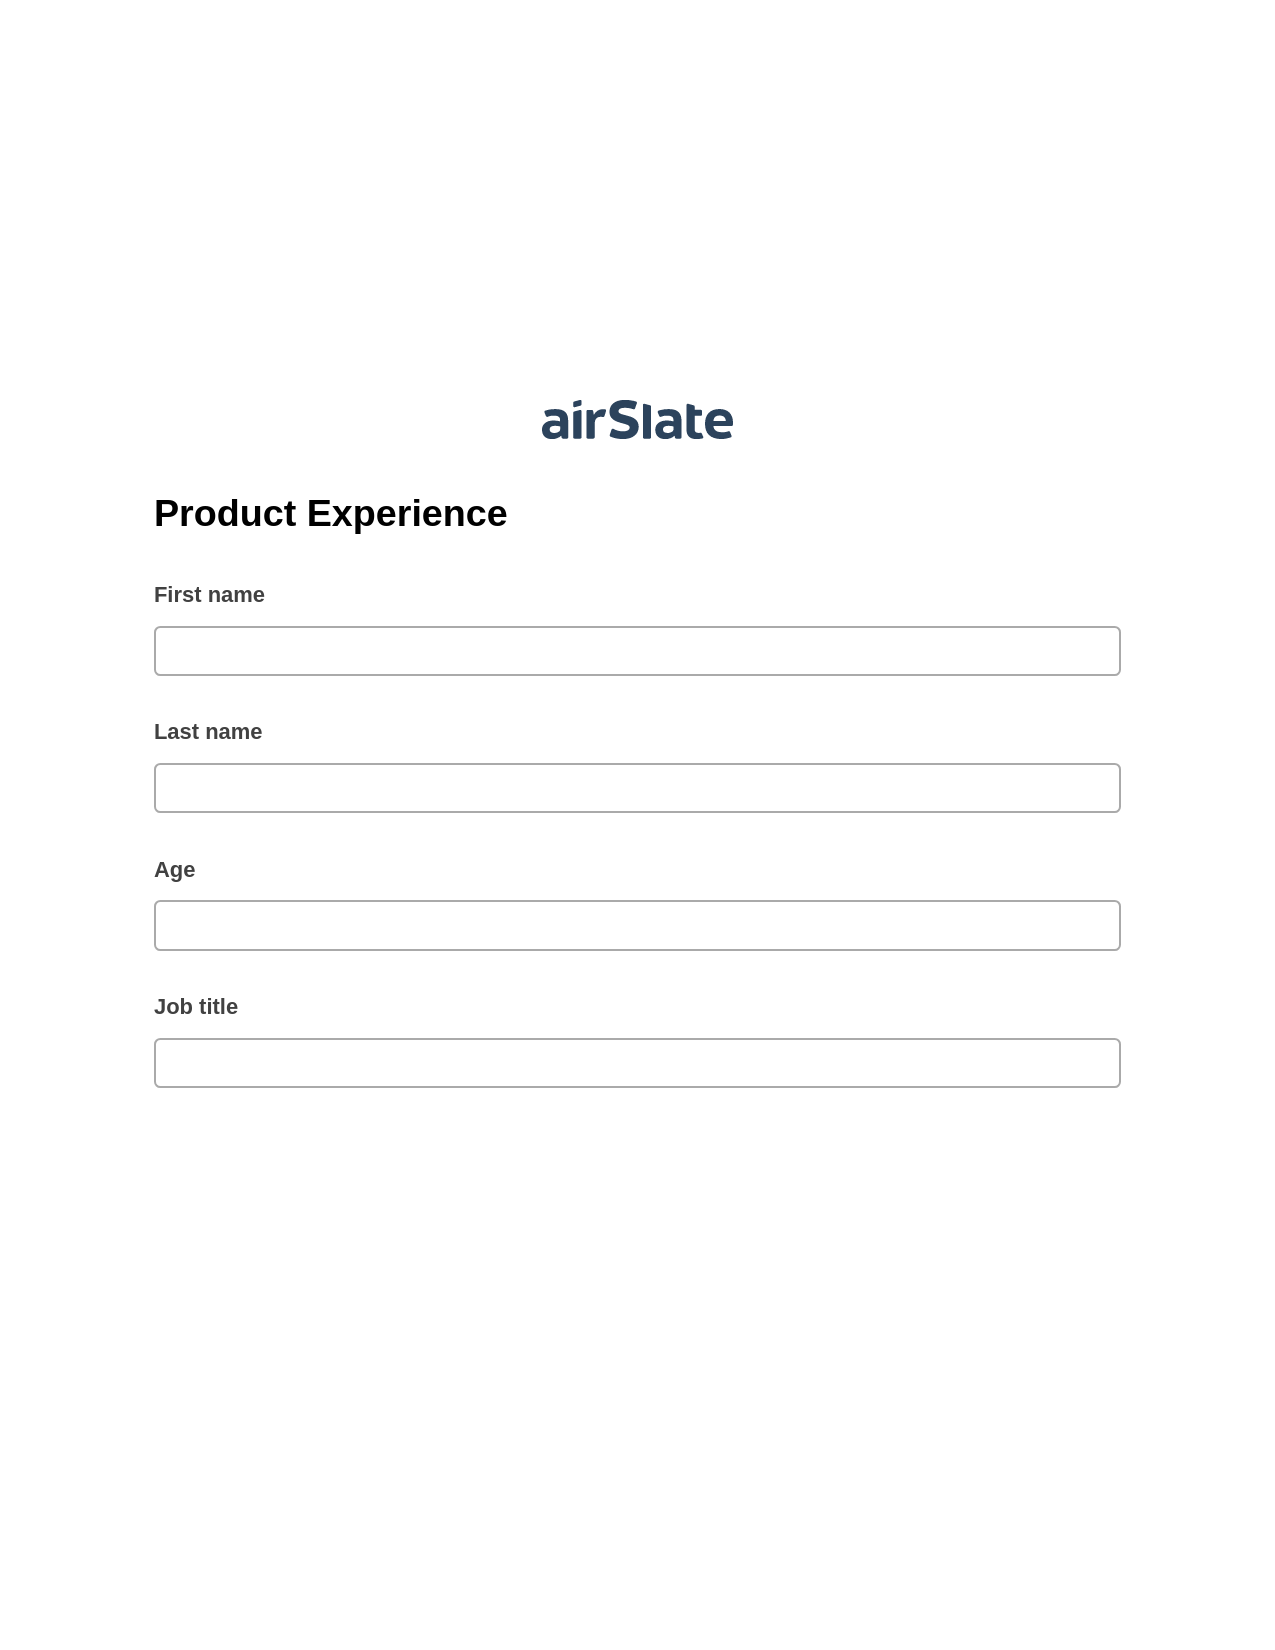 Product Experience Pre-fill from CSV File Bot, Create slate from another Flow Bot, Export to WebMerge Bot